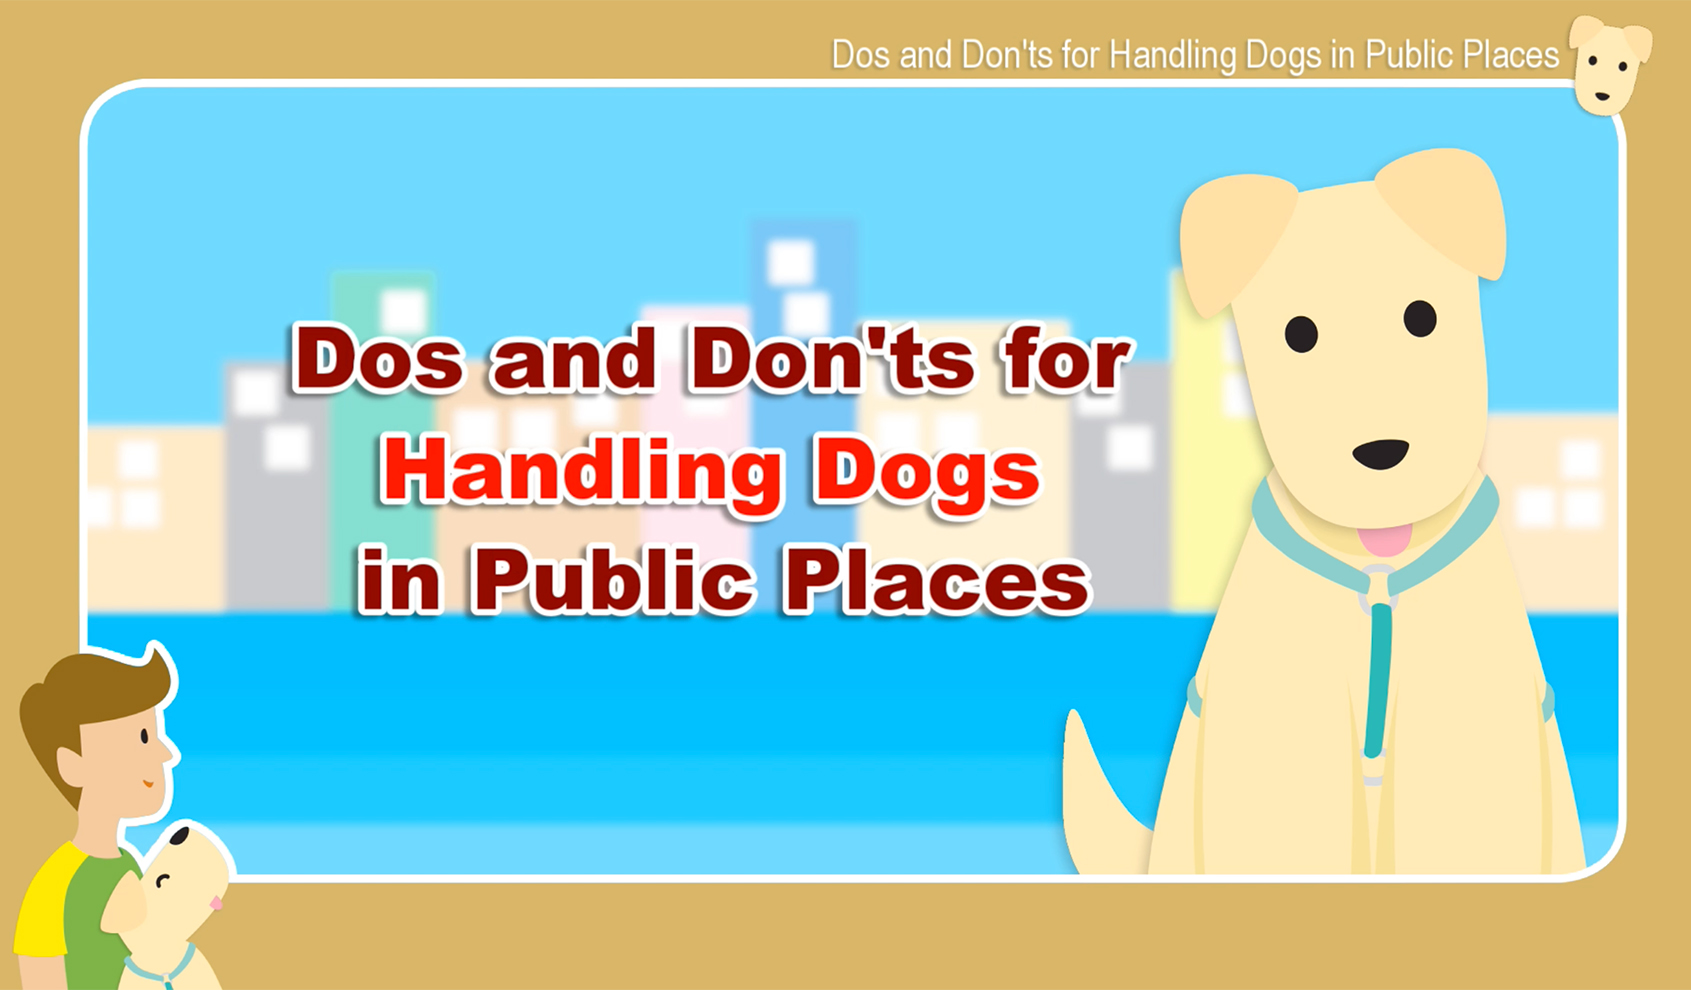 Dos and Don’ts for Handling Dogs in Public Places